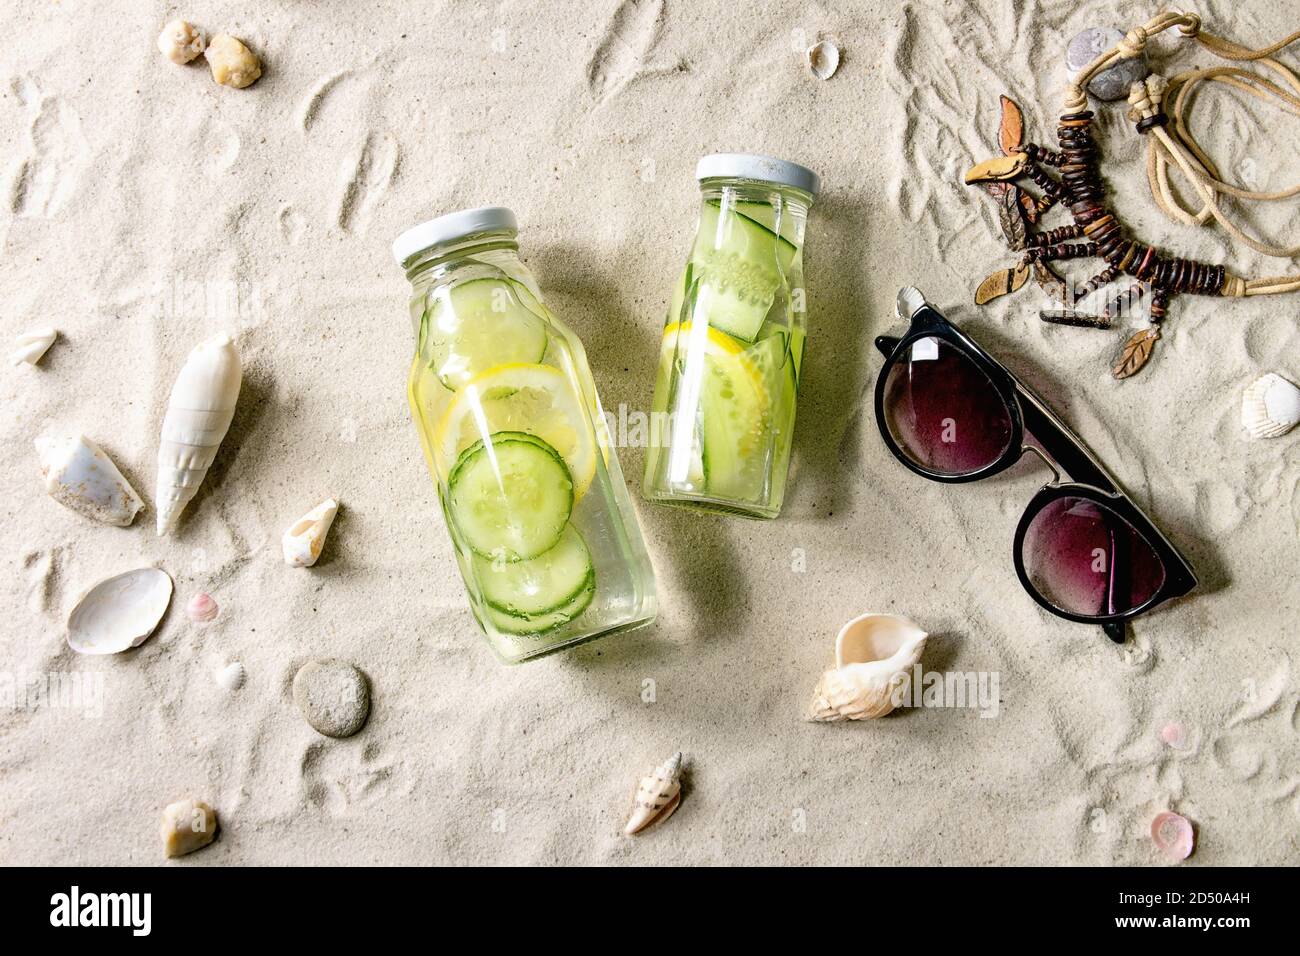 Summer theme. Two glass bottles with lemon and cucumber infusion sassy water, shells, sea stones, sunglasses, wooden beads, on white sand as backgroun Stock Photo